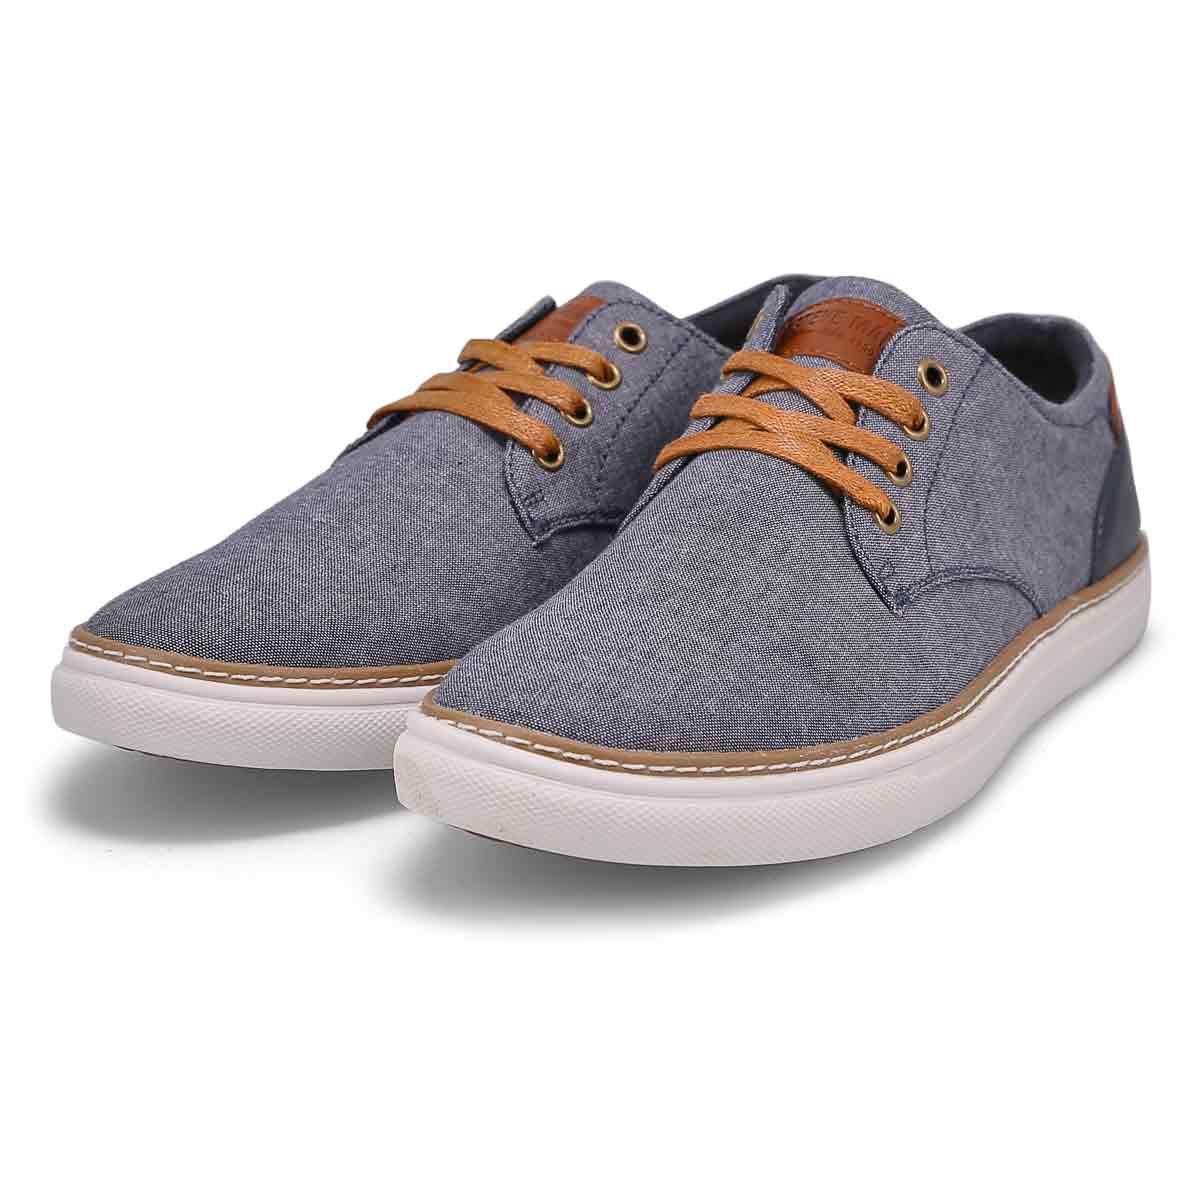 Men's P-Alive Lace Up Casual Sneaker - Navy